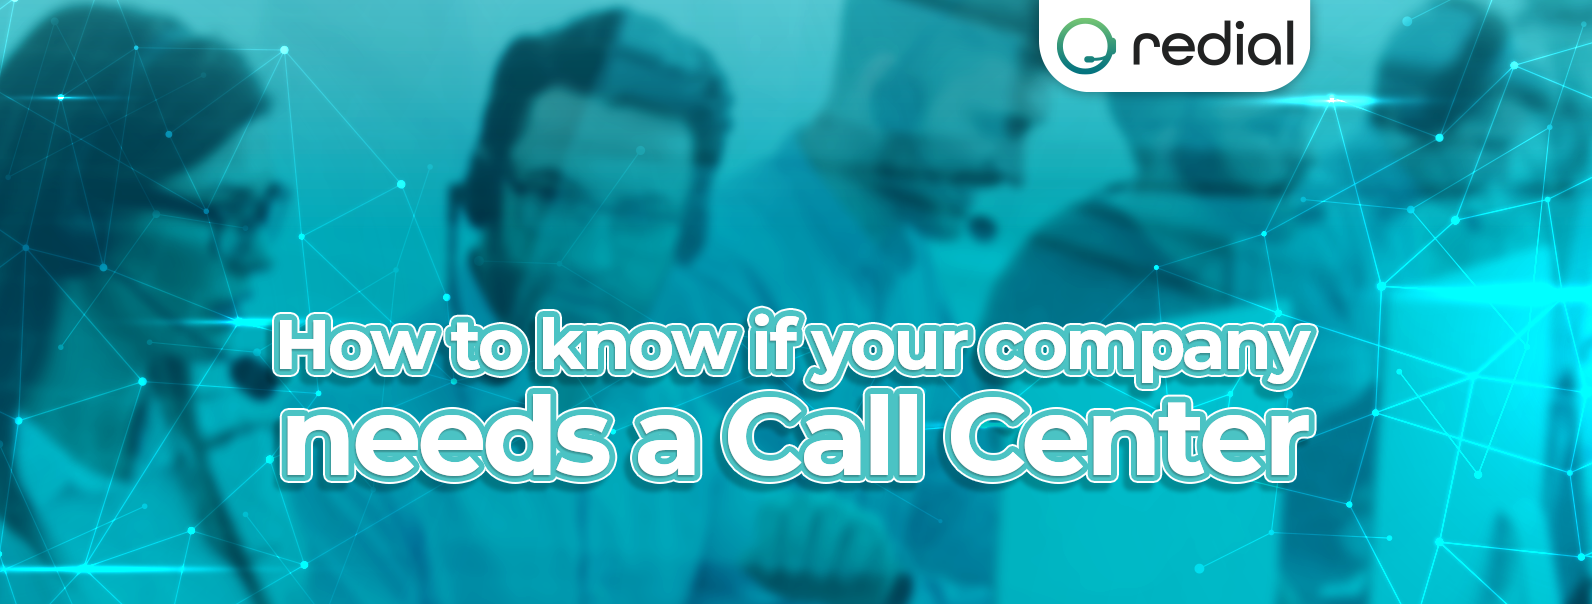 banner how to know if your company needs a call center